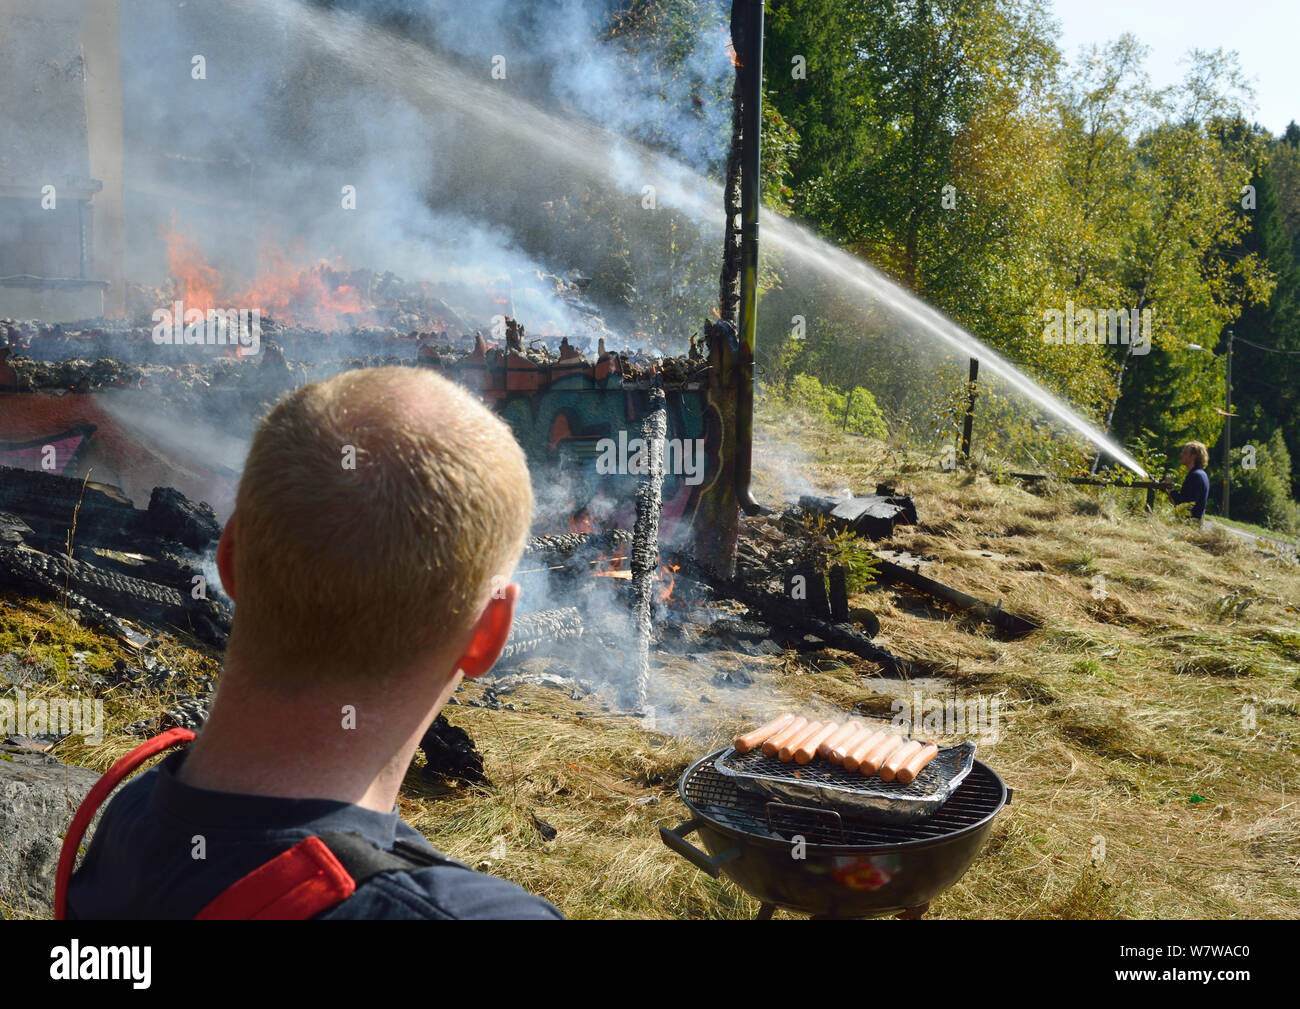 Firemen extinguishing controlled fire in abandoned house during training exercise whilst another rests and cooks sausages on a barbeque, Akerhus, Norway, September 2013. Stock Photo